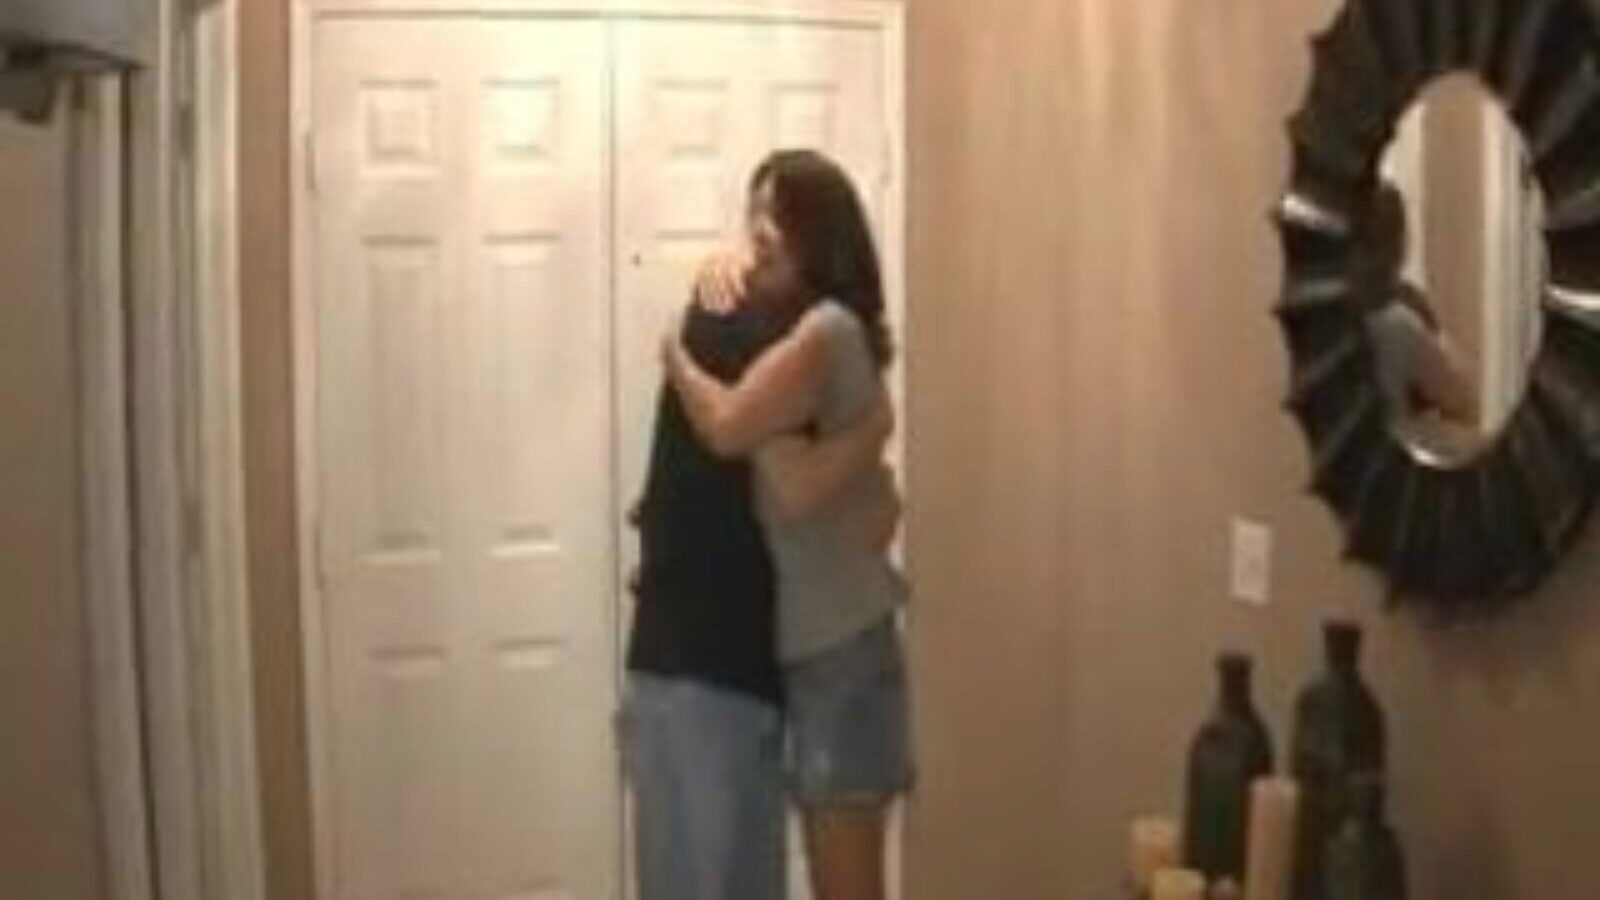 Sex Sterving Son Returned from Jail is Satisfied by Mom Watch Sex Sterving Son Returned from Jail is Satisfied by Mom clip on xHamster - the ultimate bevy of free Vk Sex & mother I'd like to fuck hard-core pornography tube videos